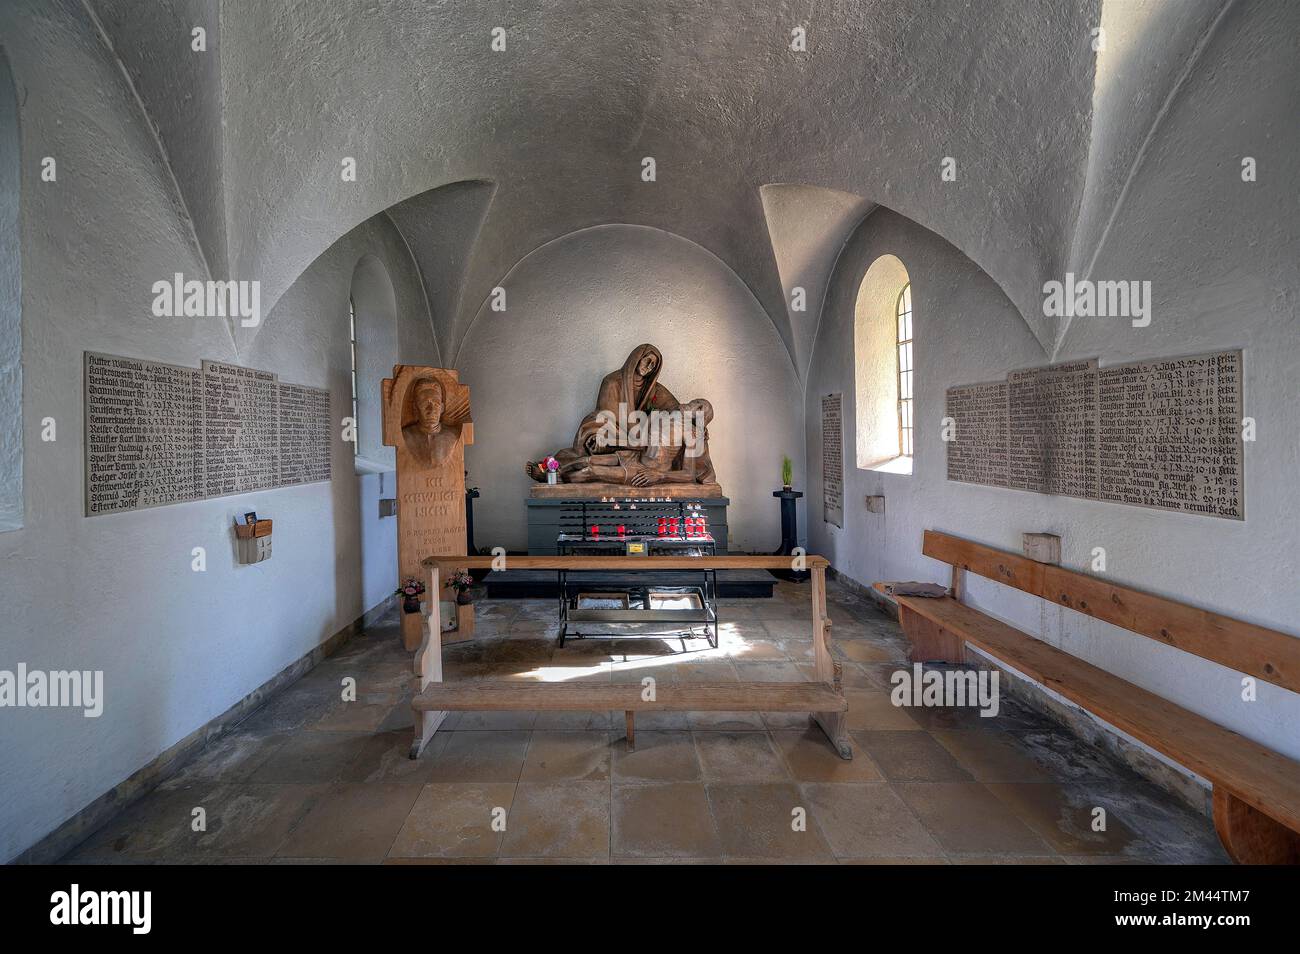 Statue of Father Rupert Mayer by sculptor Michael Vogler and Pieta, Seelenkapelle from 1492, the former ossuary, Oberstdorf, Allgaeu, Bavaria, Germany Stock Photo